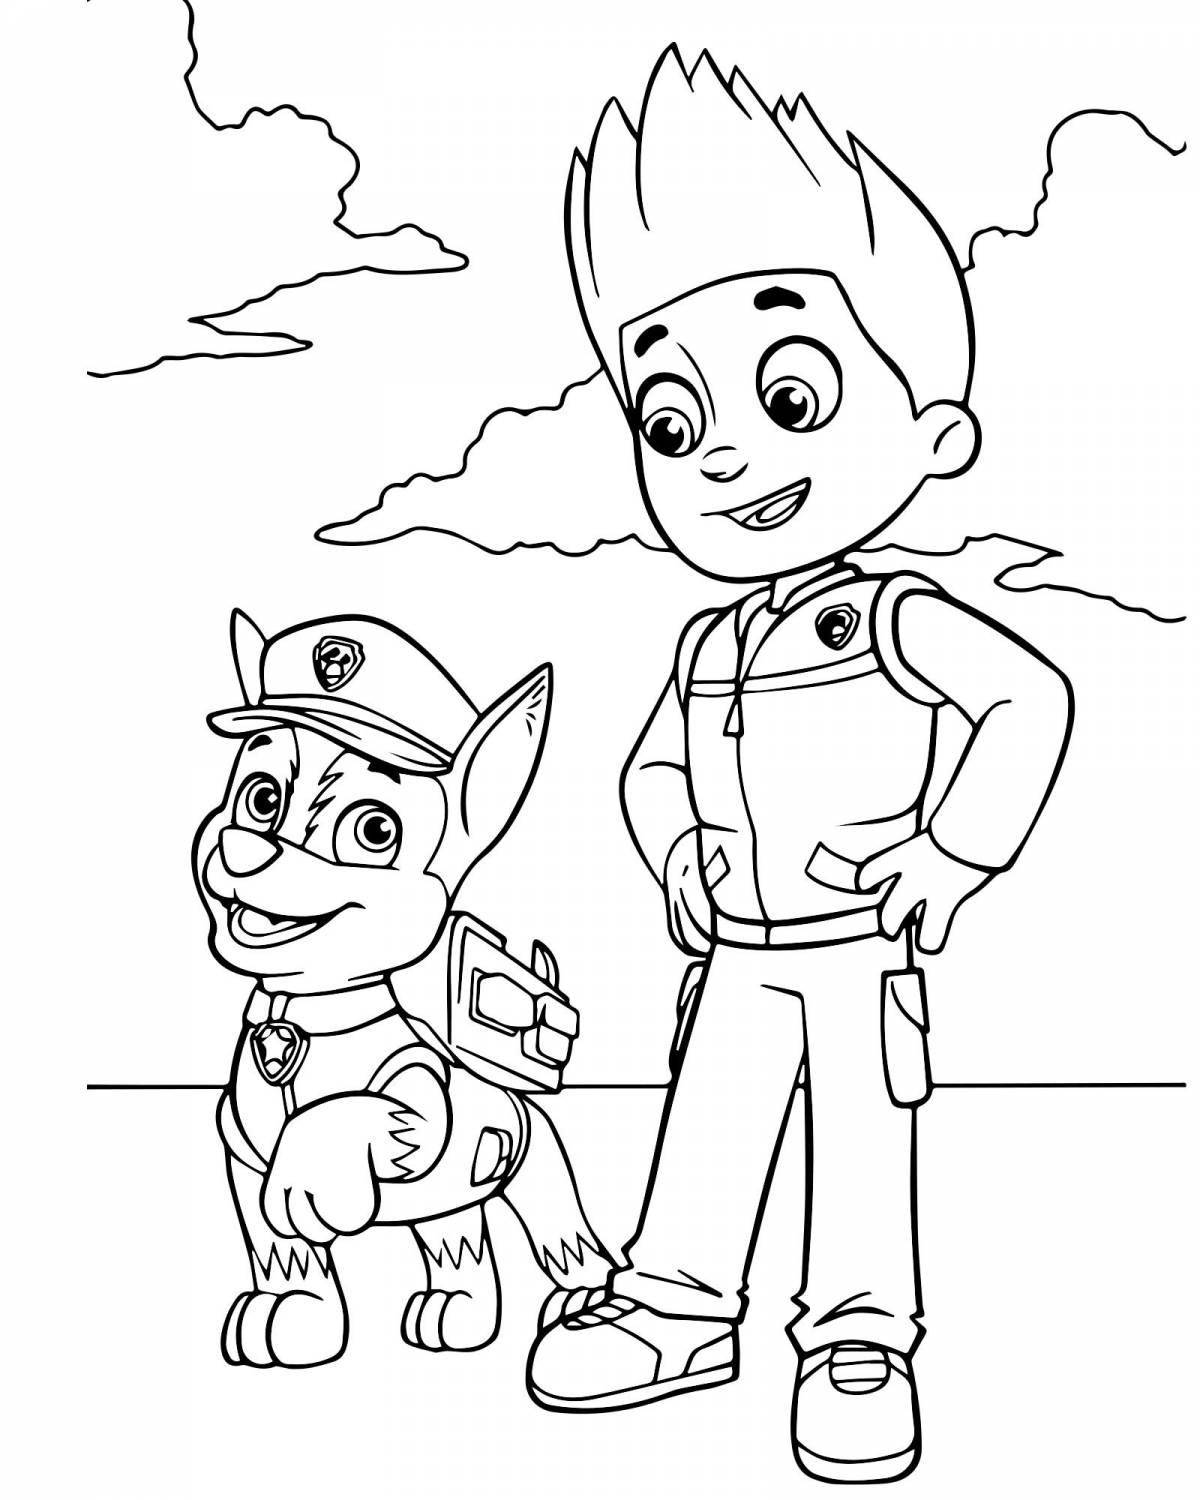 Charming racer coloring page